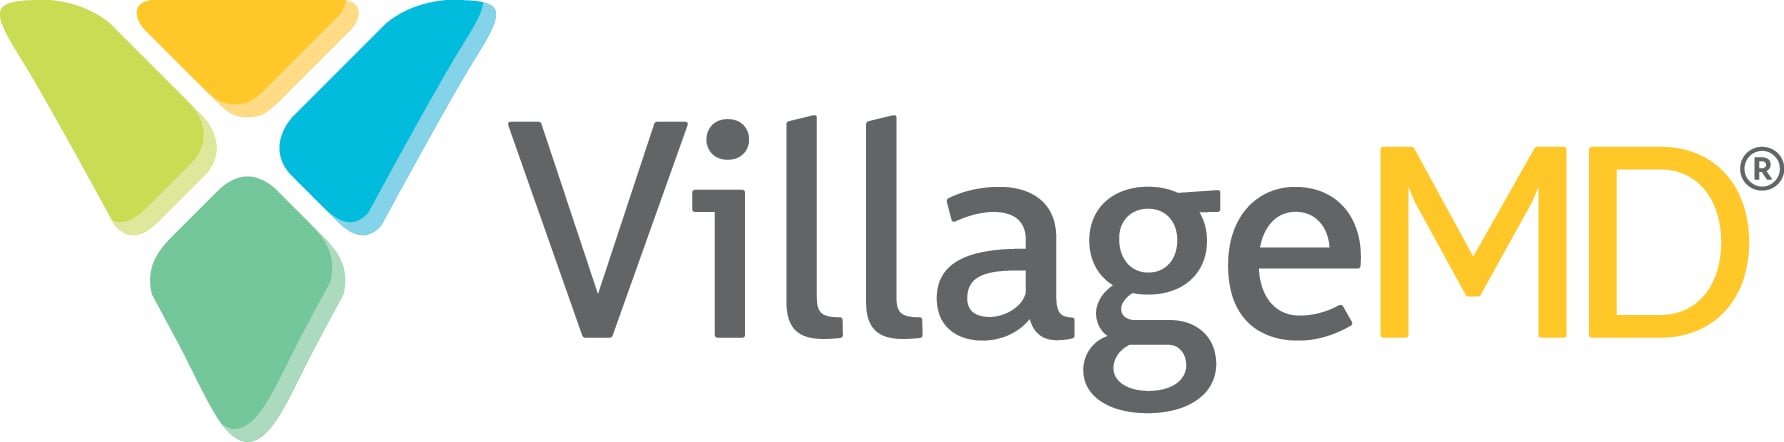 Huron Valley Physicians Association Joins VillageMD and Expands its Footprint in Michigan